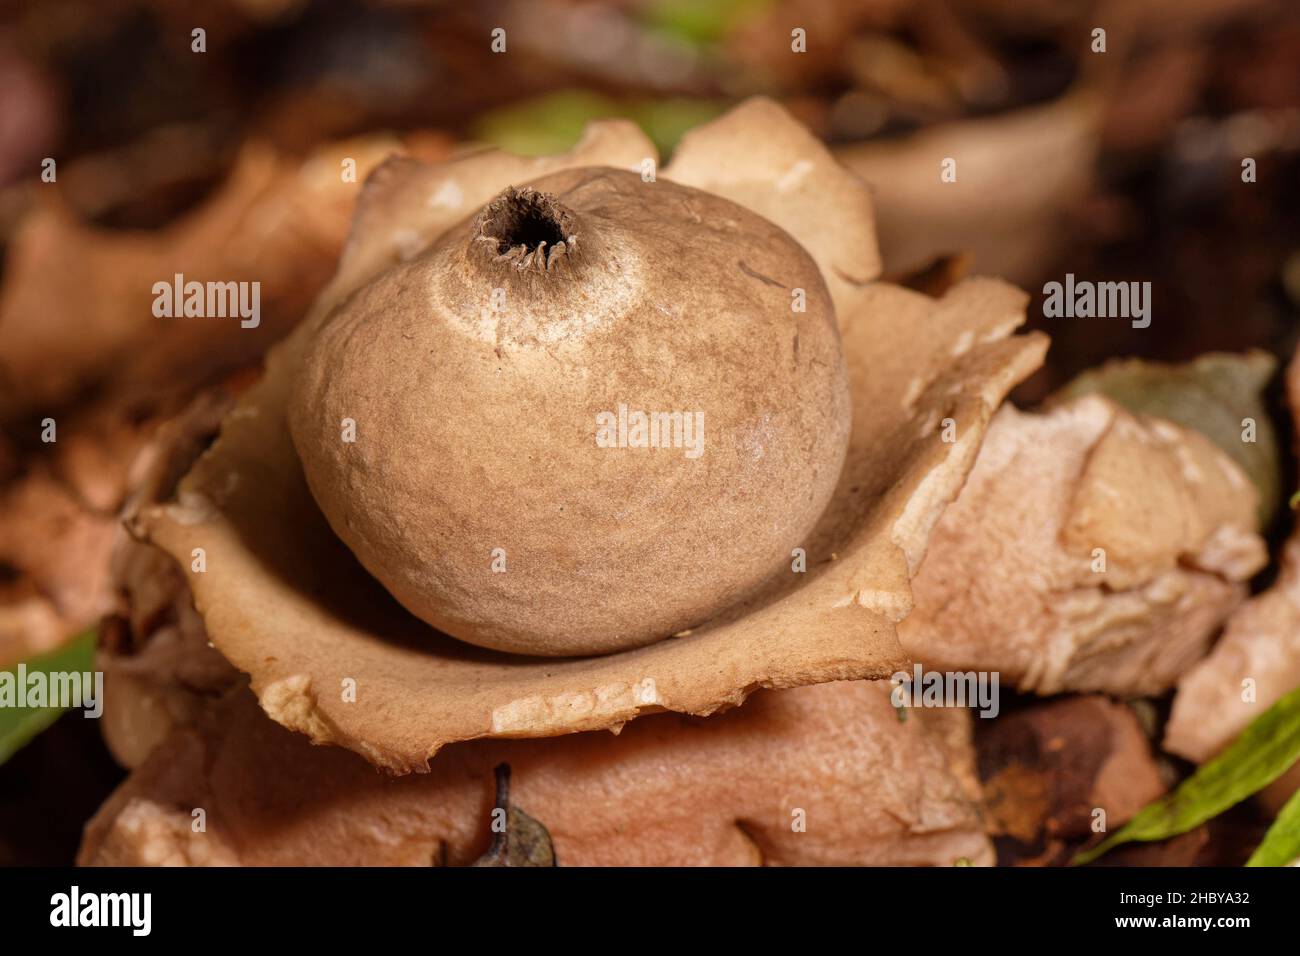 Collared earthstar (Geastrum triplex) among Beech woodland leaf litter, with the spore bag sitting atop the “collar” left by its peeled back rays, Bu Stock Photo